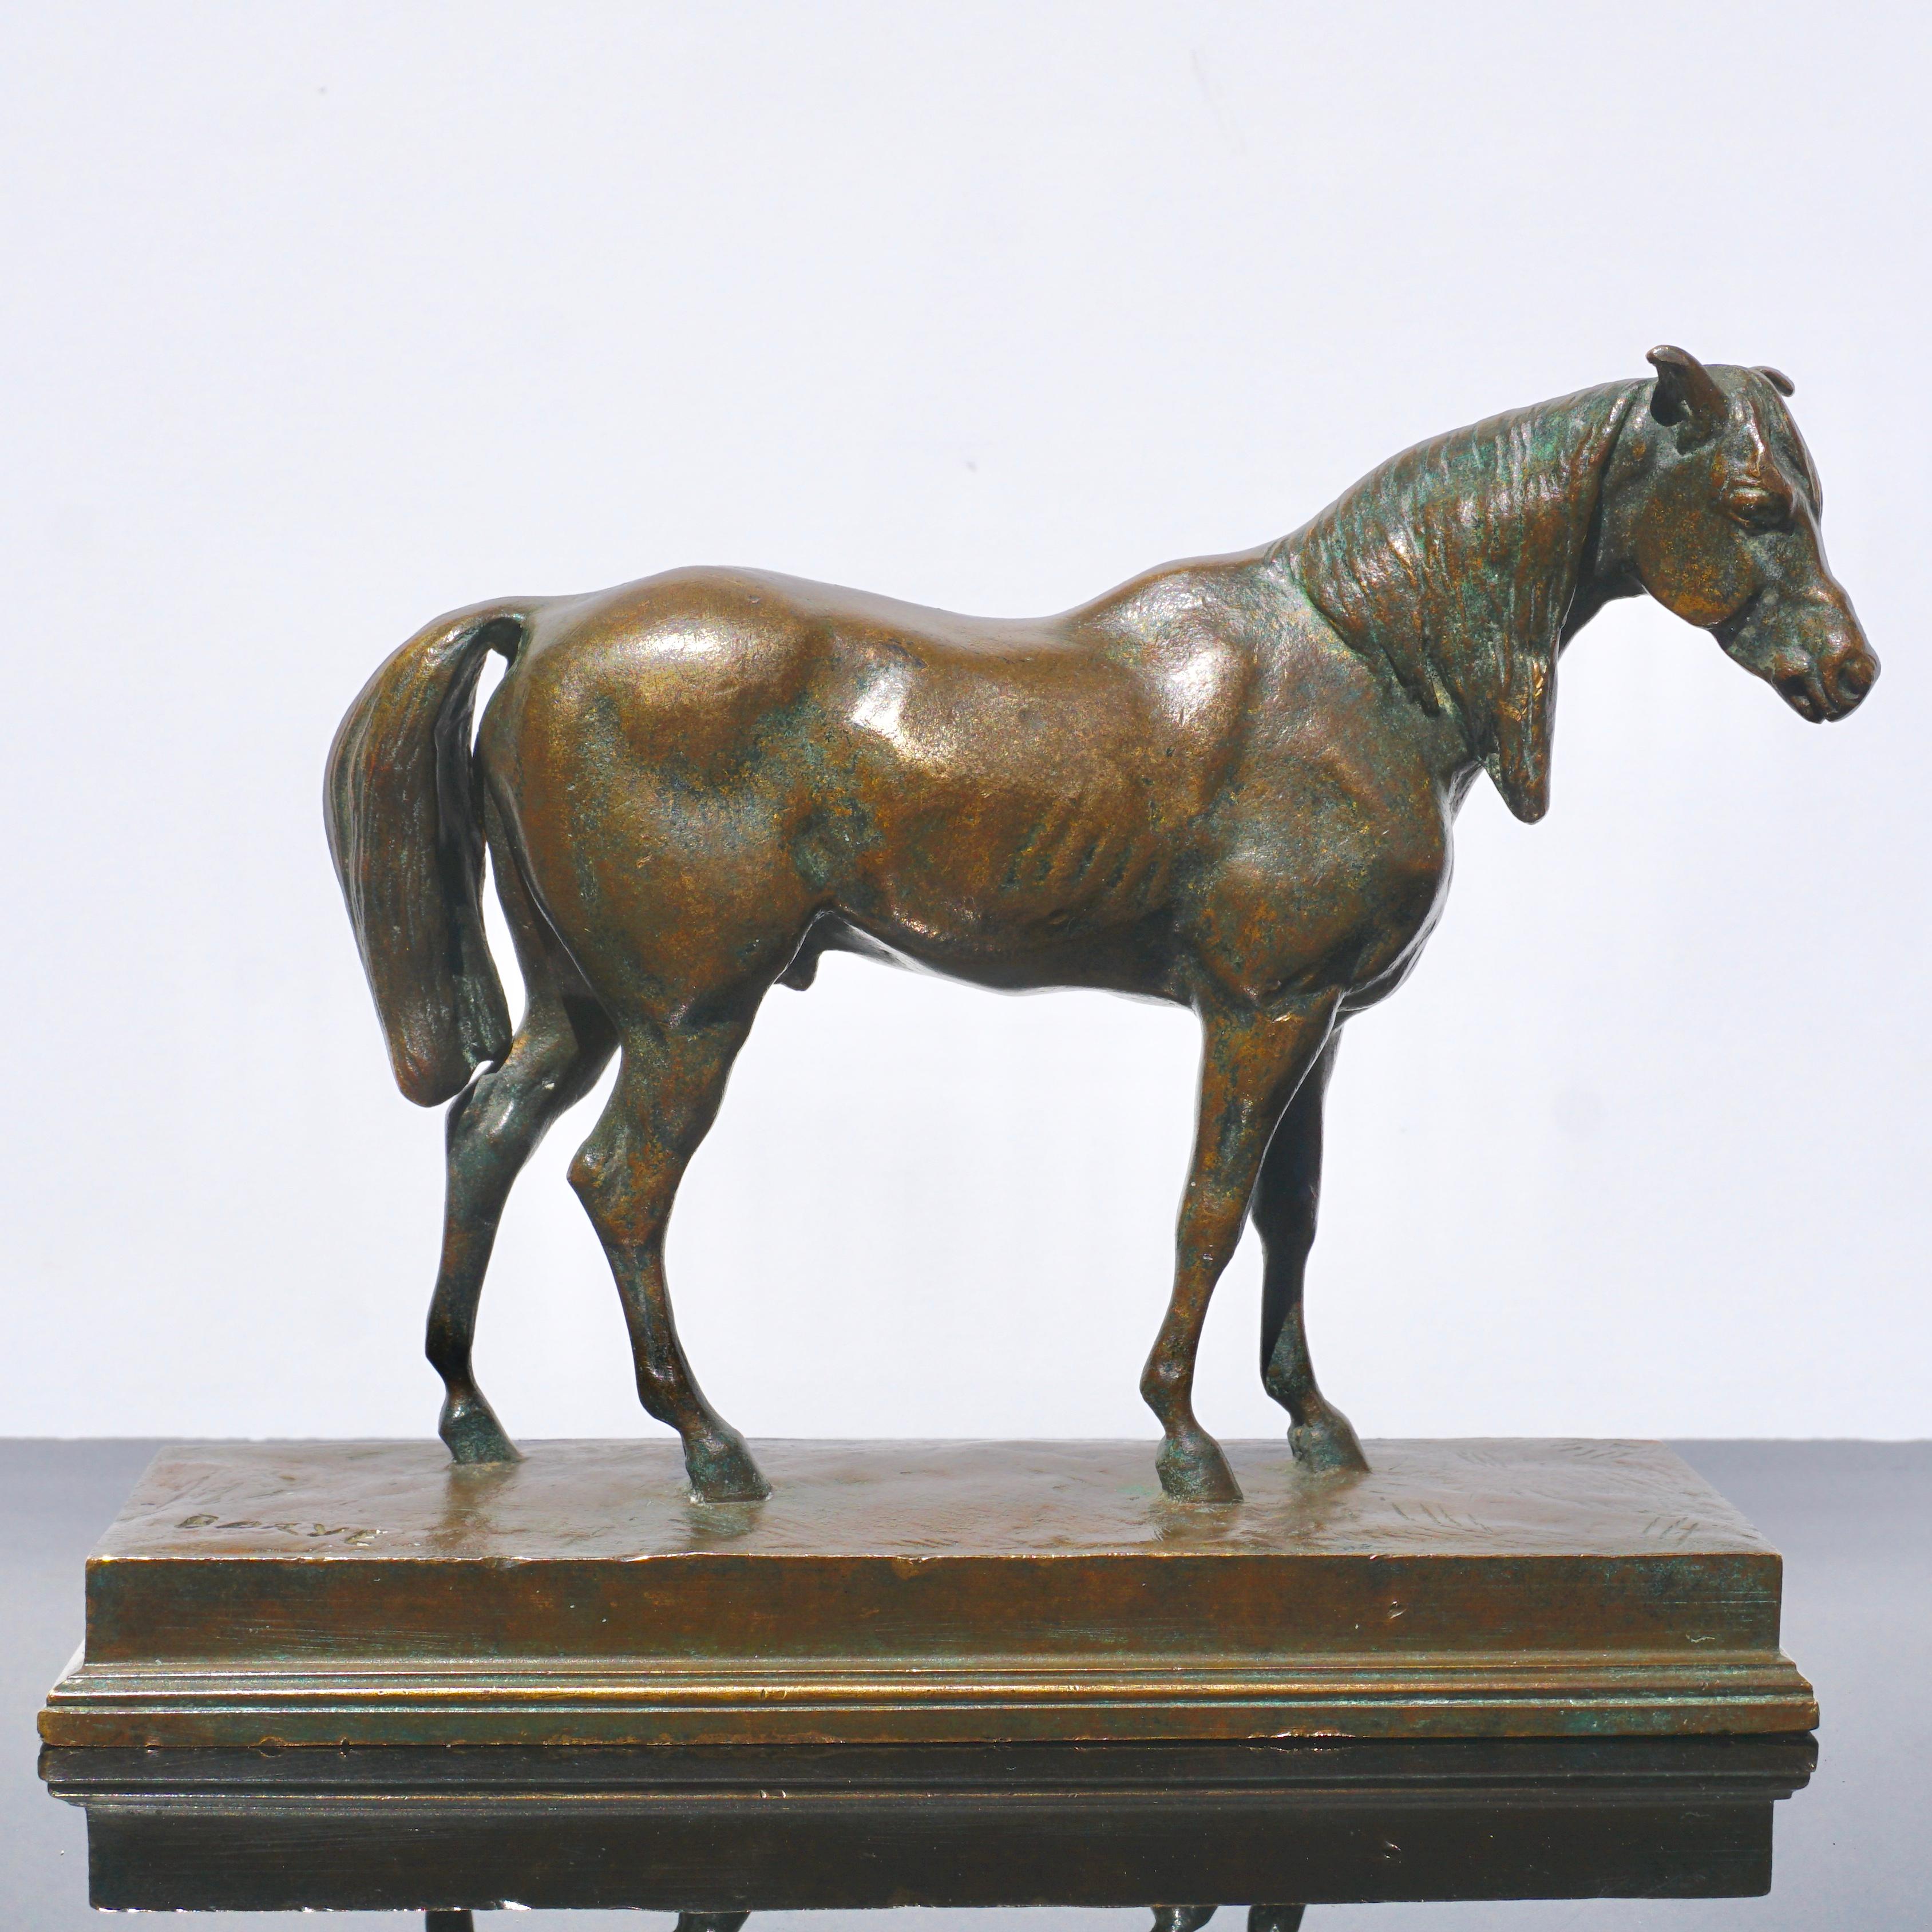 Antoine Louis Barye (French, 1796-1875)
Cheval Demi-Sang (tete levee) / Half-blood horse (head raised)
Chocolate brown and green patina.

Measures: Height 5.3 inches
Width 7 inches
Depth 2.3 inches

Signed on base 'Barye' 
Also incised “F.